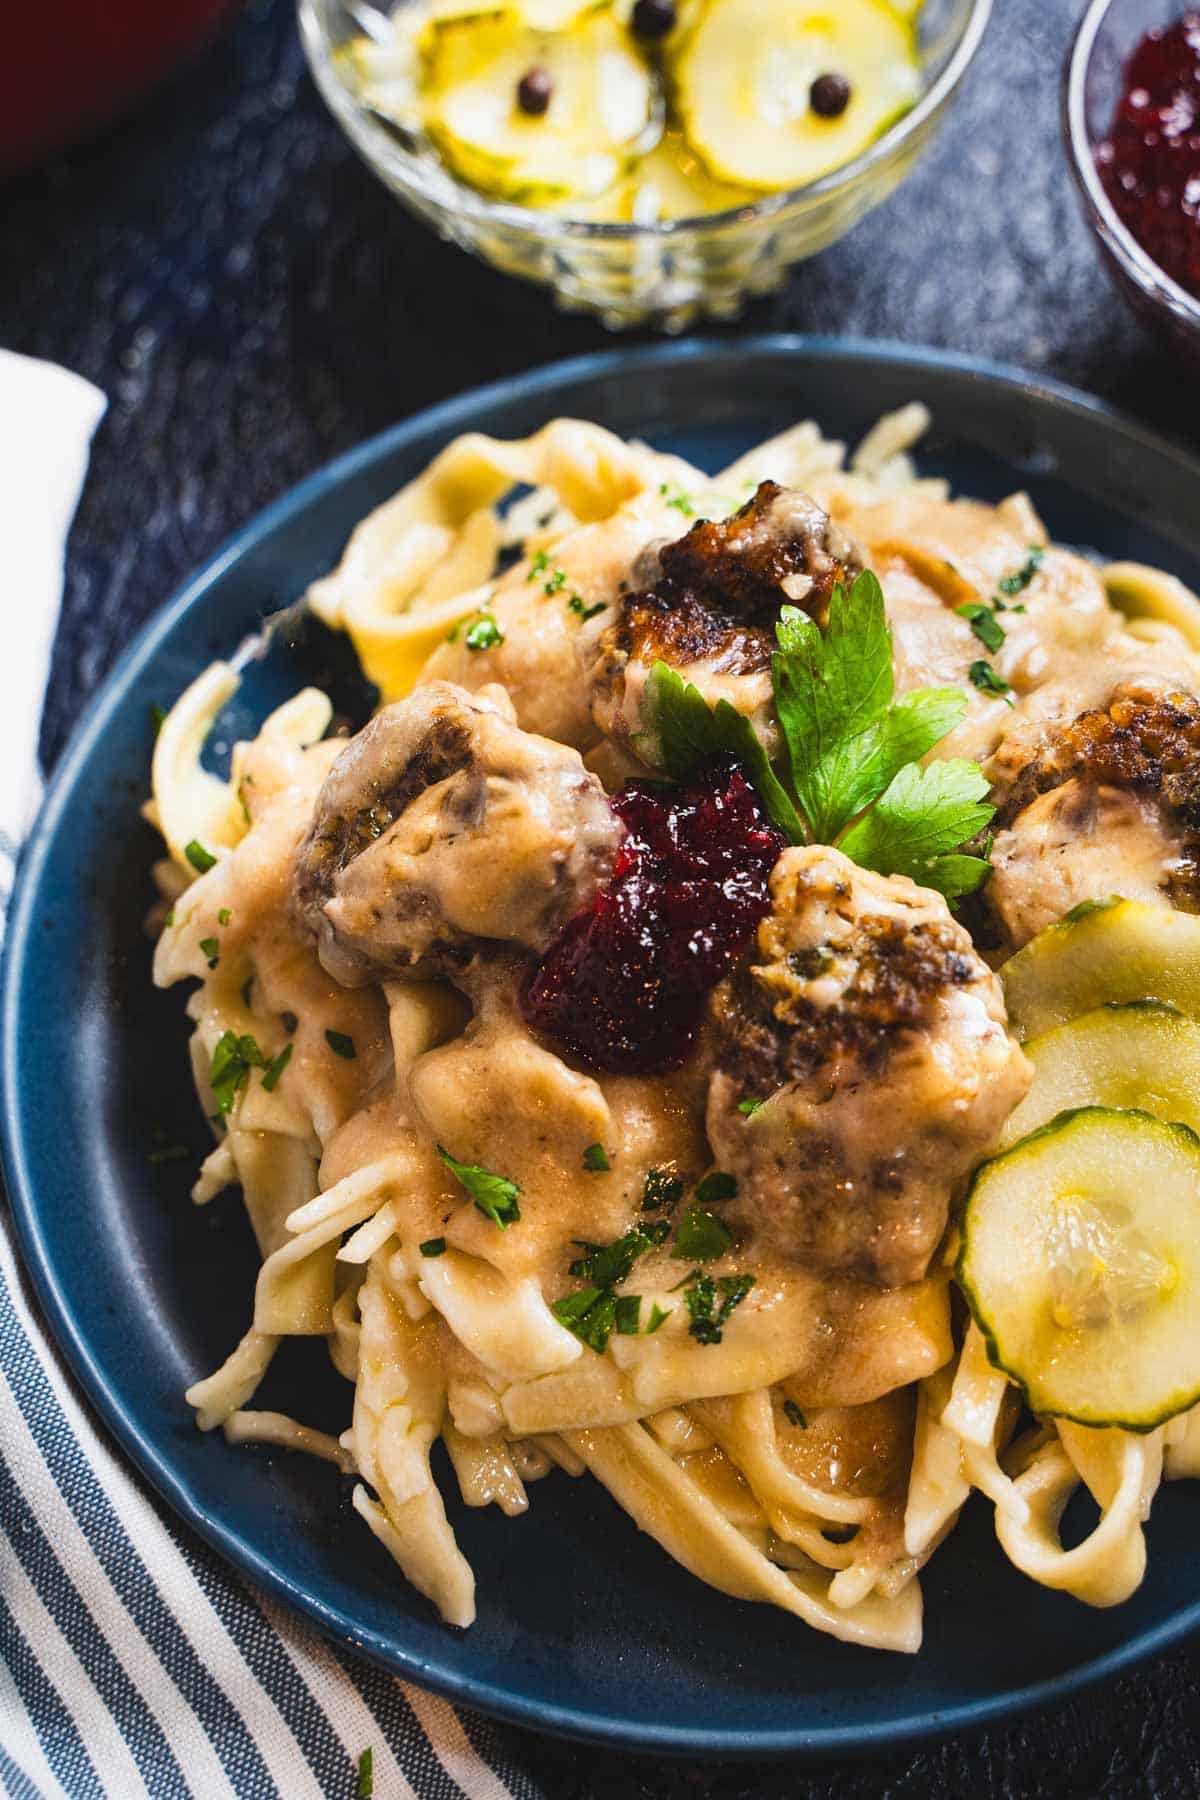 swedish meatballs and a sauce made with sourcream over a bed of buttered noodles on a blue plate garnished with lingonberry jam and pickled cucumbers.